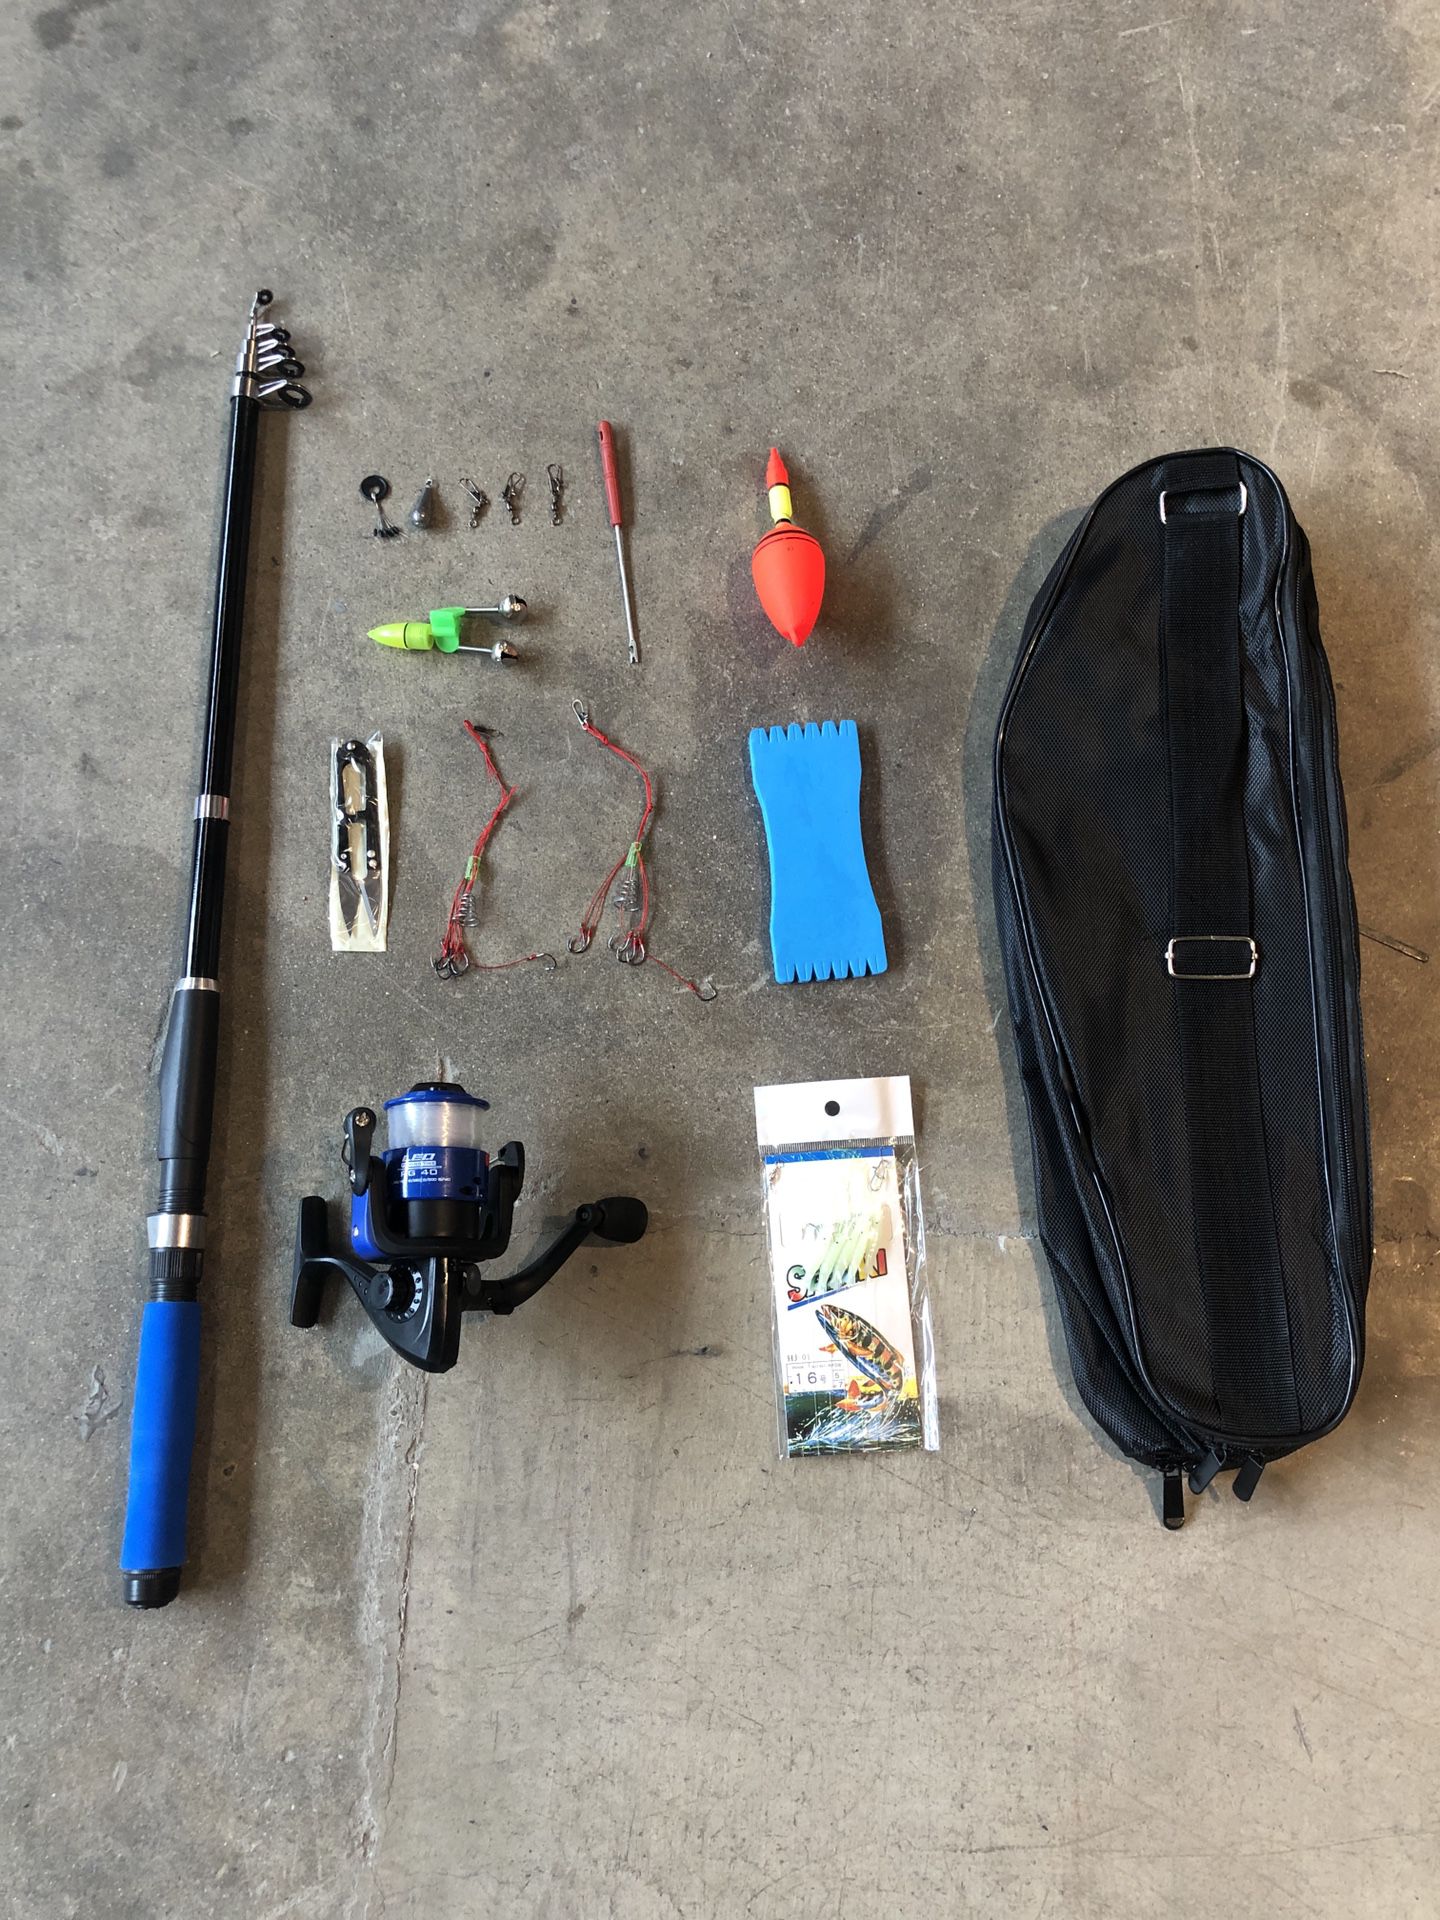 Fishing Pole / Rod And Reel, Complete with weights, hooks, lures, scissors, bag